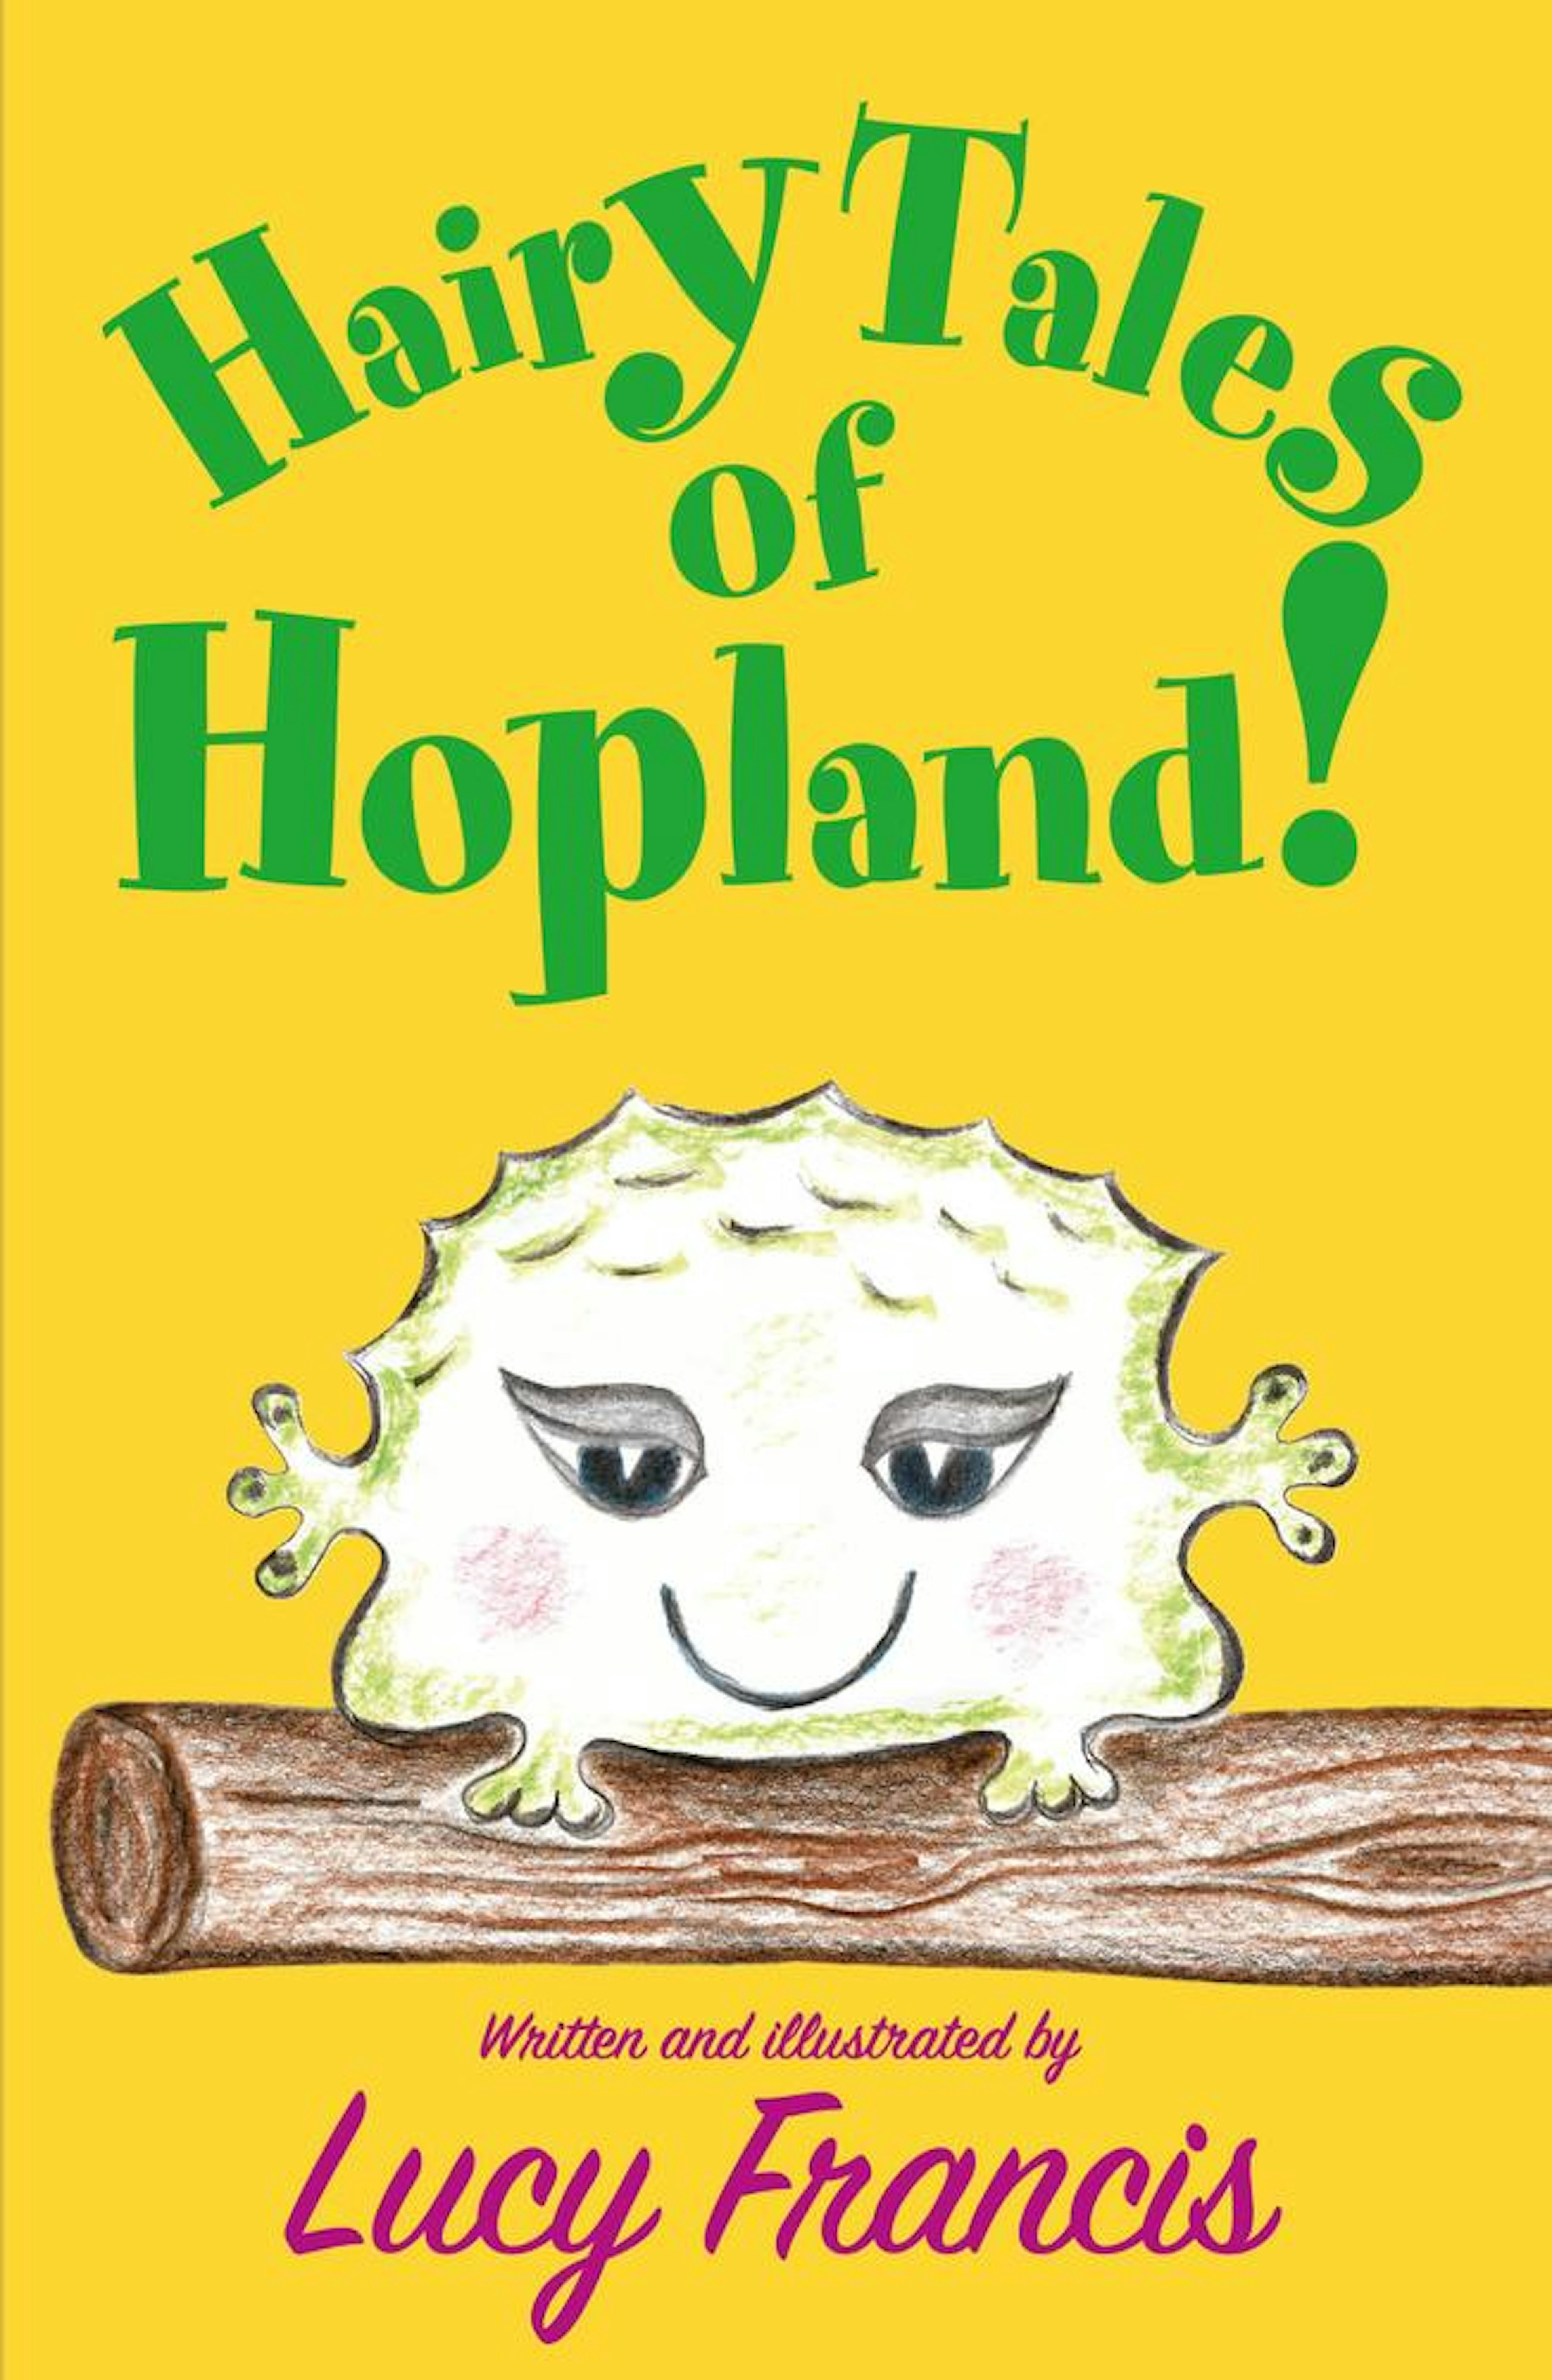 Hairy Tales of Hopland!